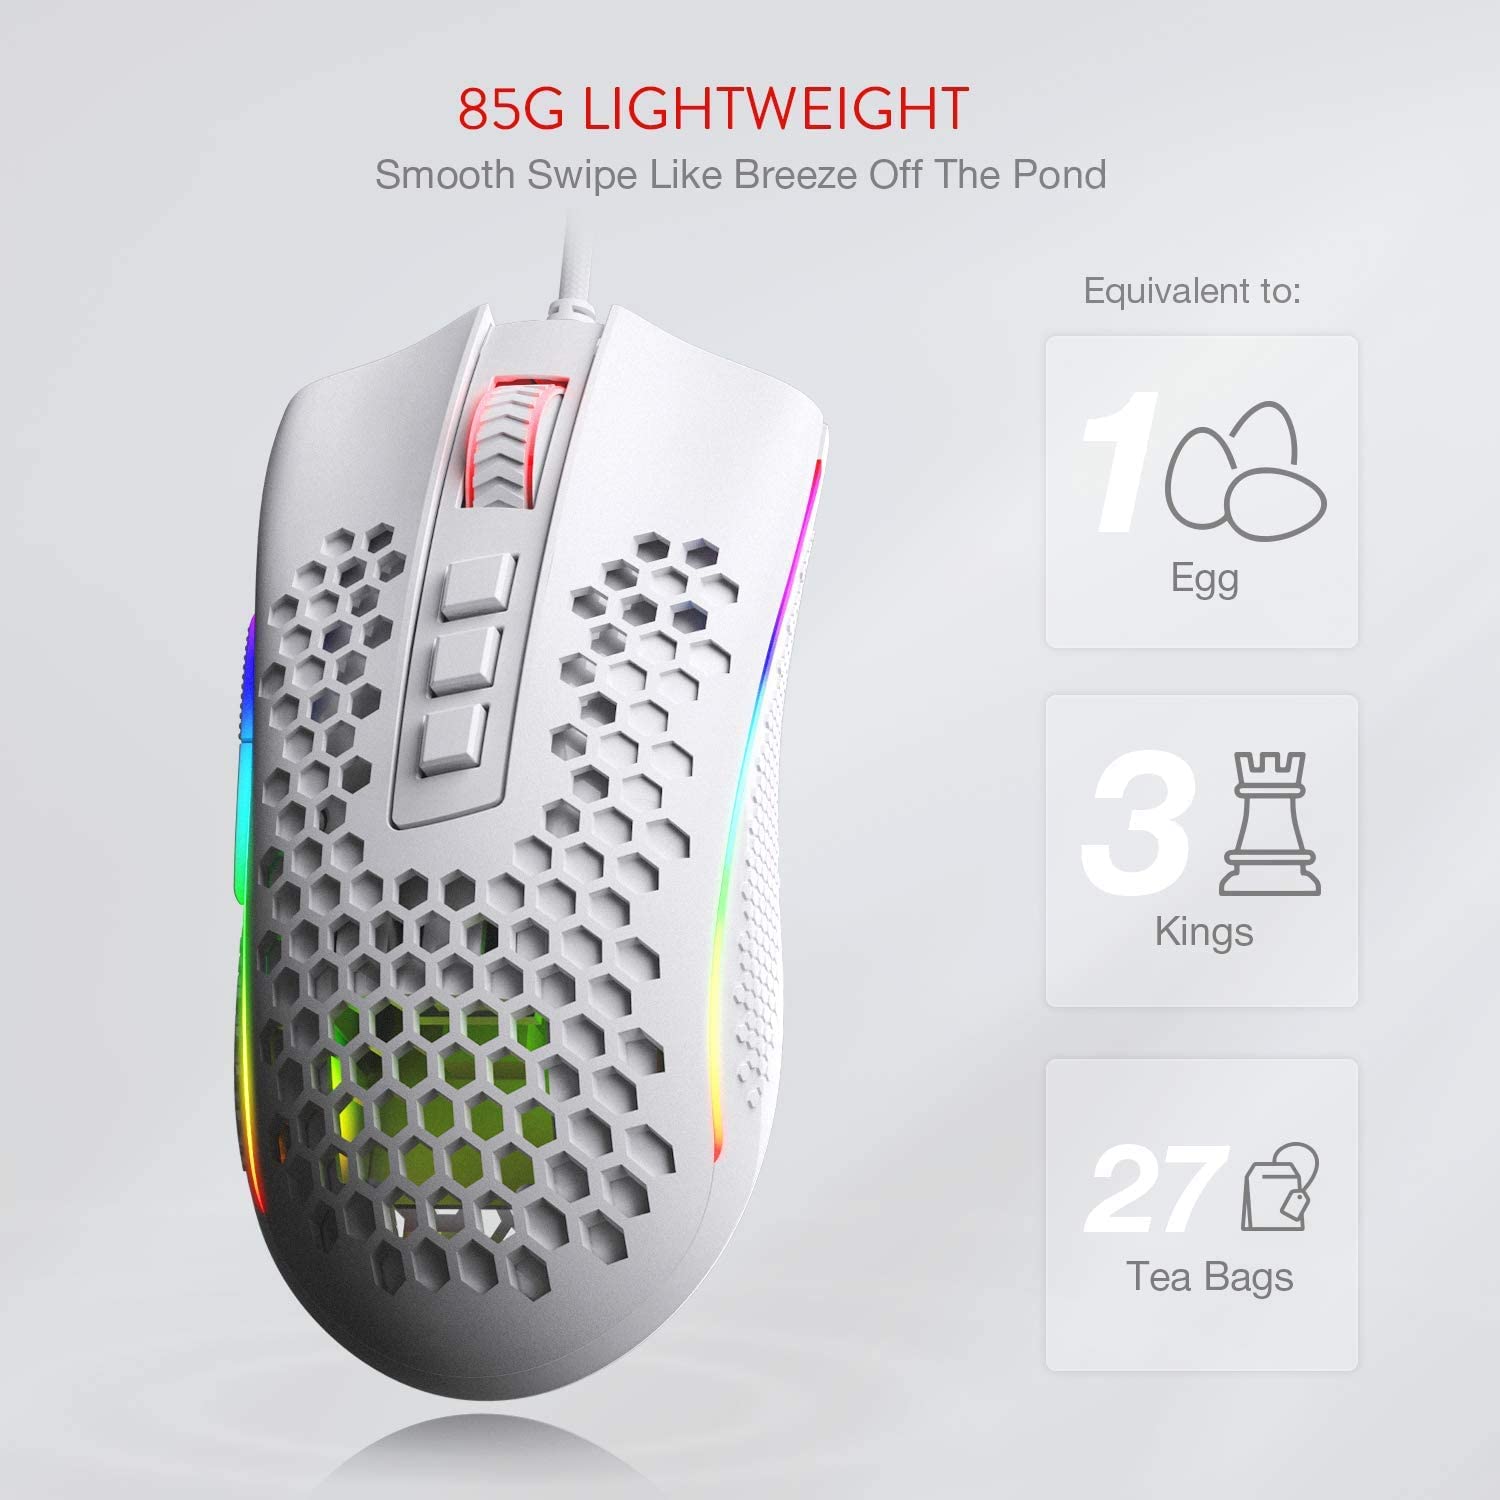 Redragon M808 Storm Lightweight RGB Gaming Mouse